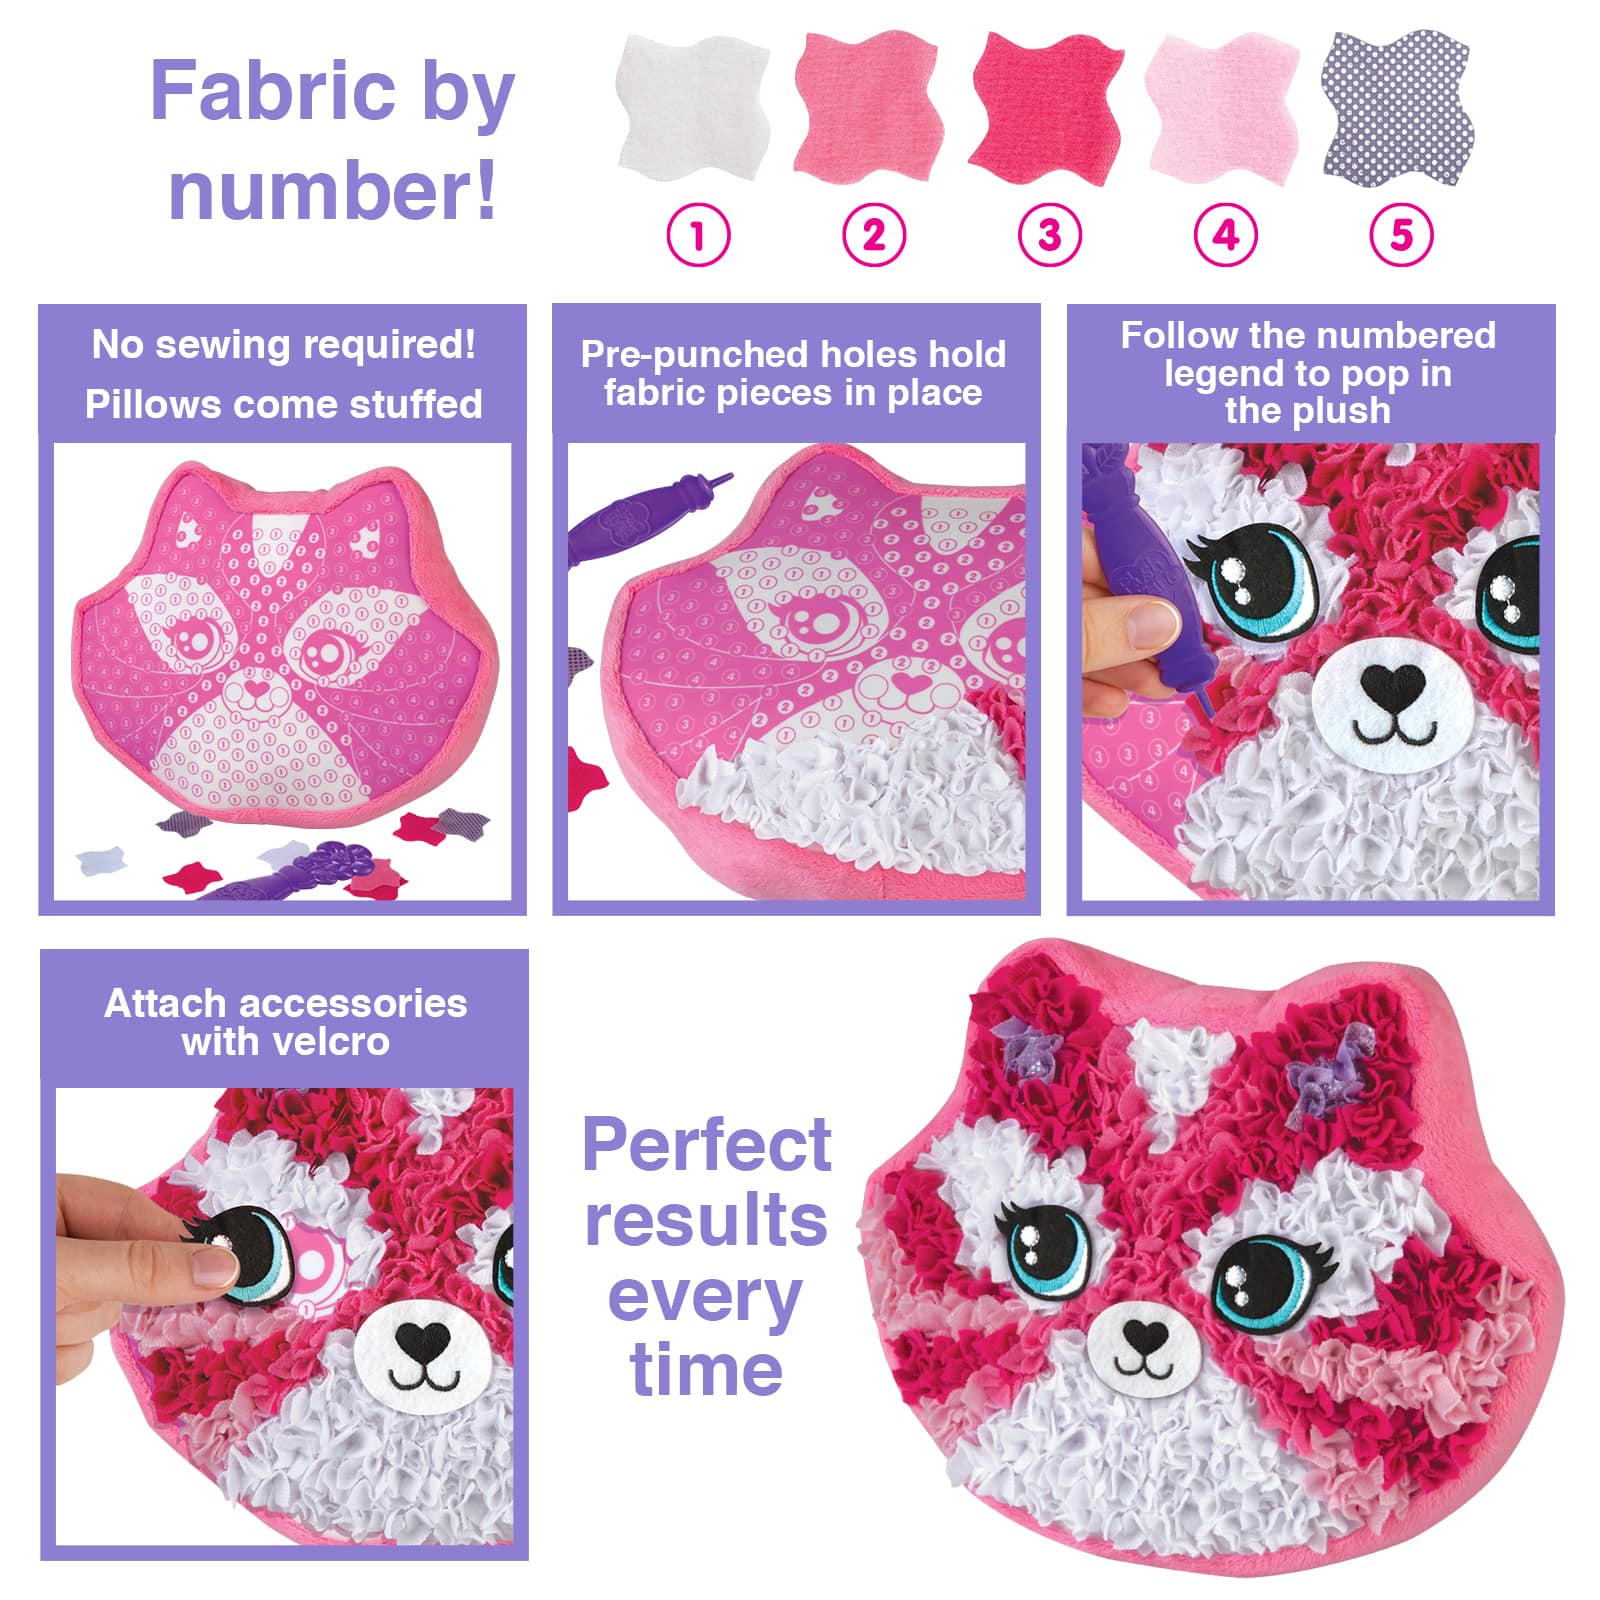 PlushCraft Fabric by Number Kitten Pillow